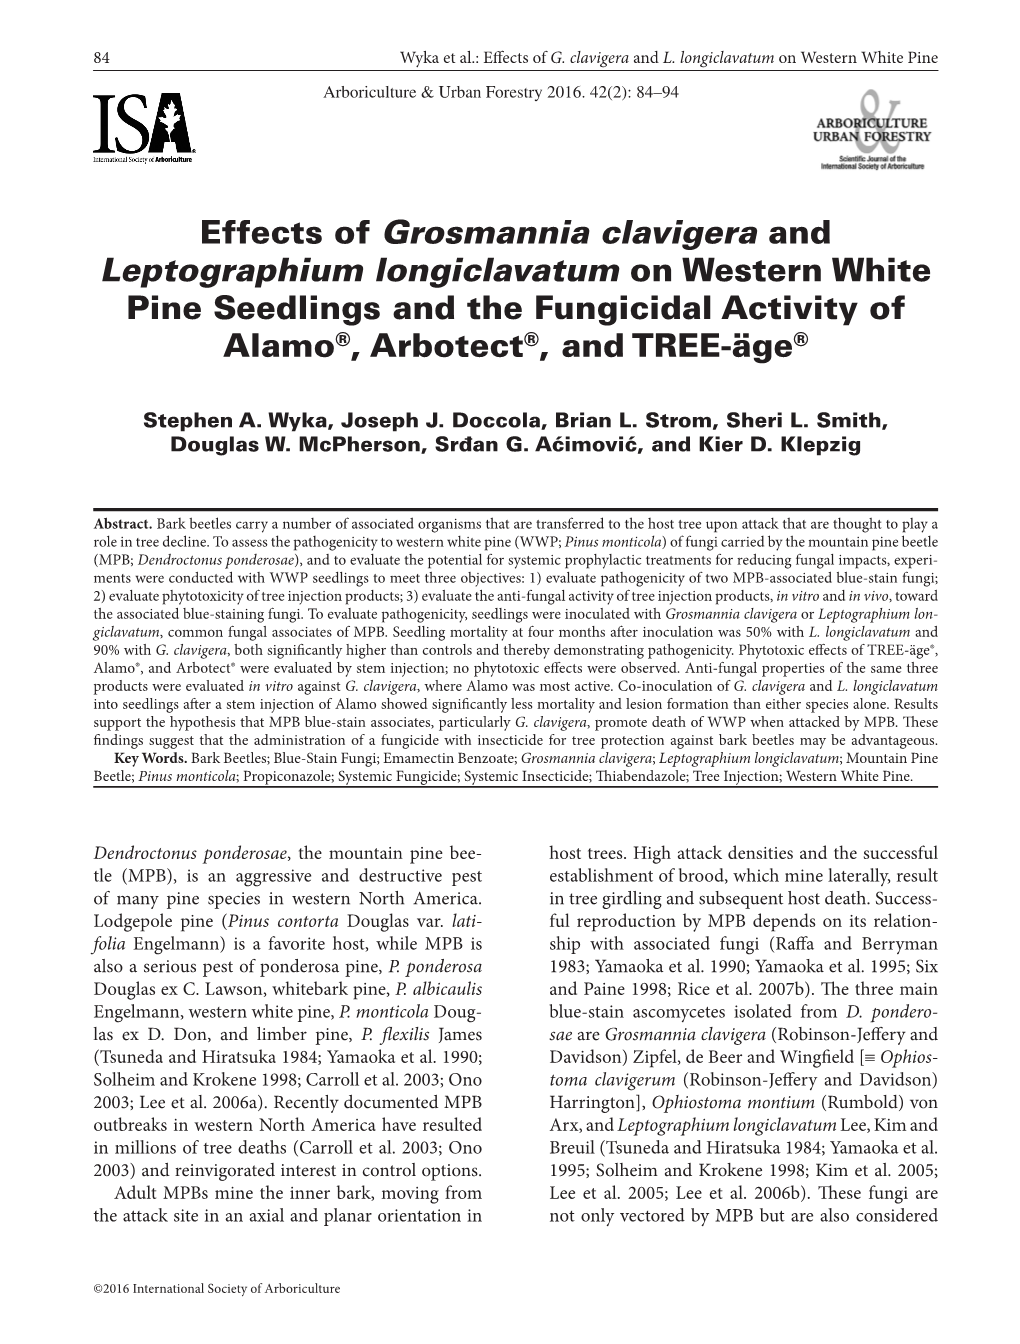 Effects of Grosmannia Clavigera and Leptographium Longiclavatum on Western White Pine Seedlings and the Fungicidal Activity of Alamo®, Arbotect®, and TREE-Äge®